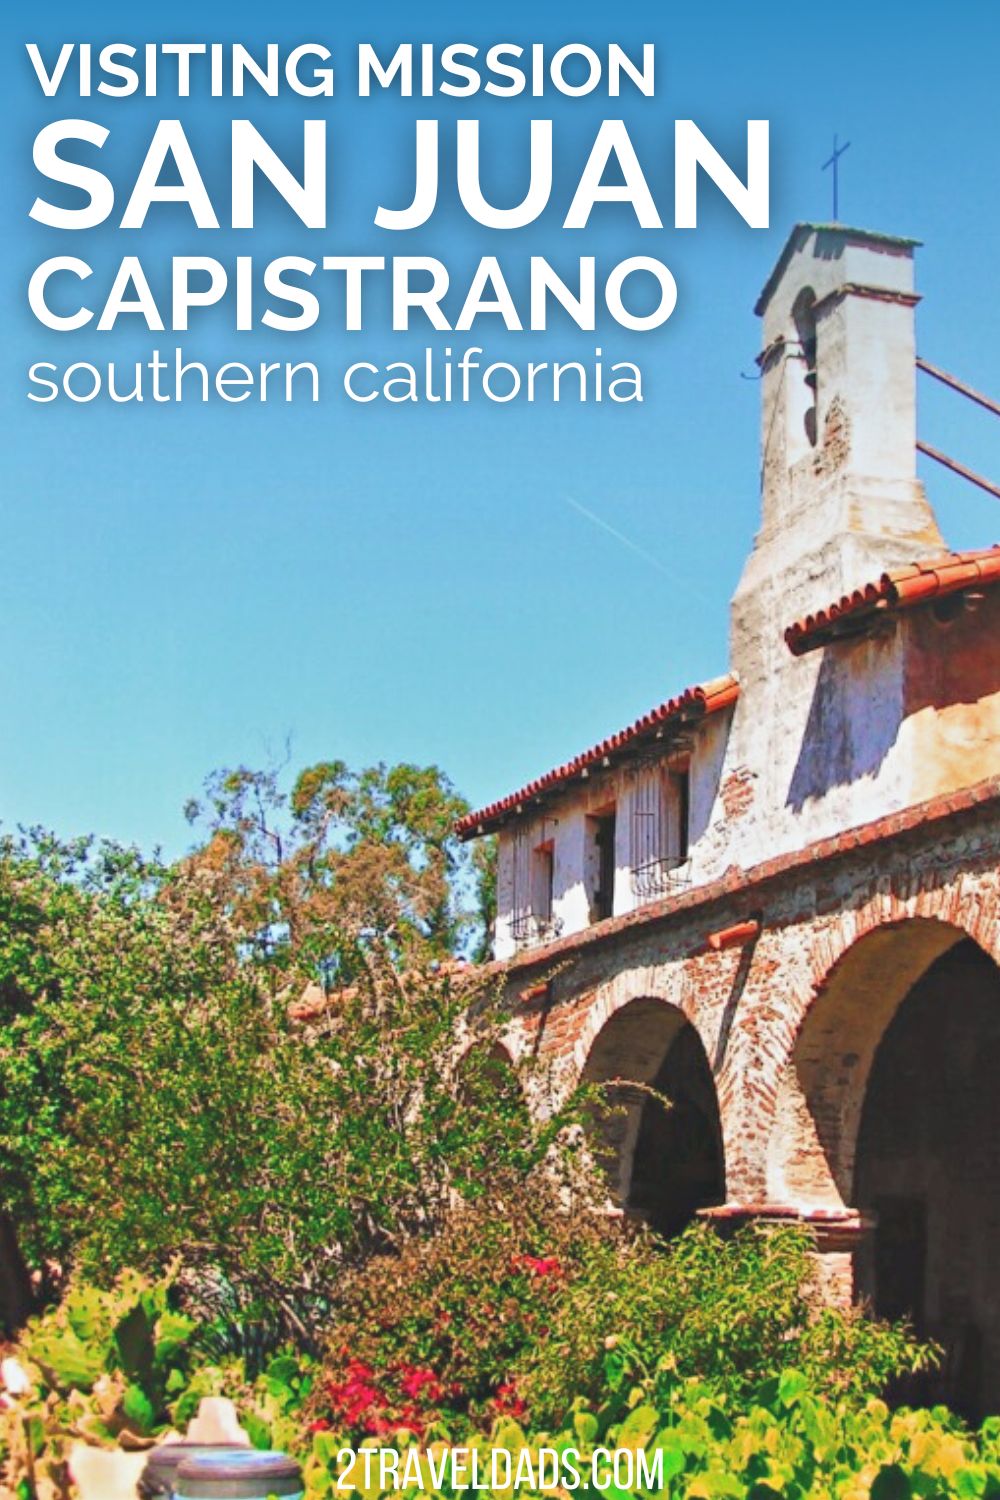 Mission San Juan Capistrano is one of the most beautiful Spanish missions in Southern California. Located between San Diego and Los Angeles, see what there is to do at San Juan Capistrano and in the surrounding area.